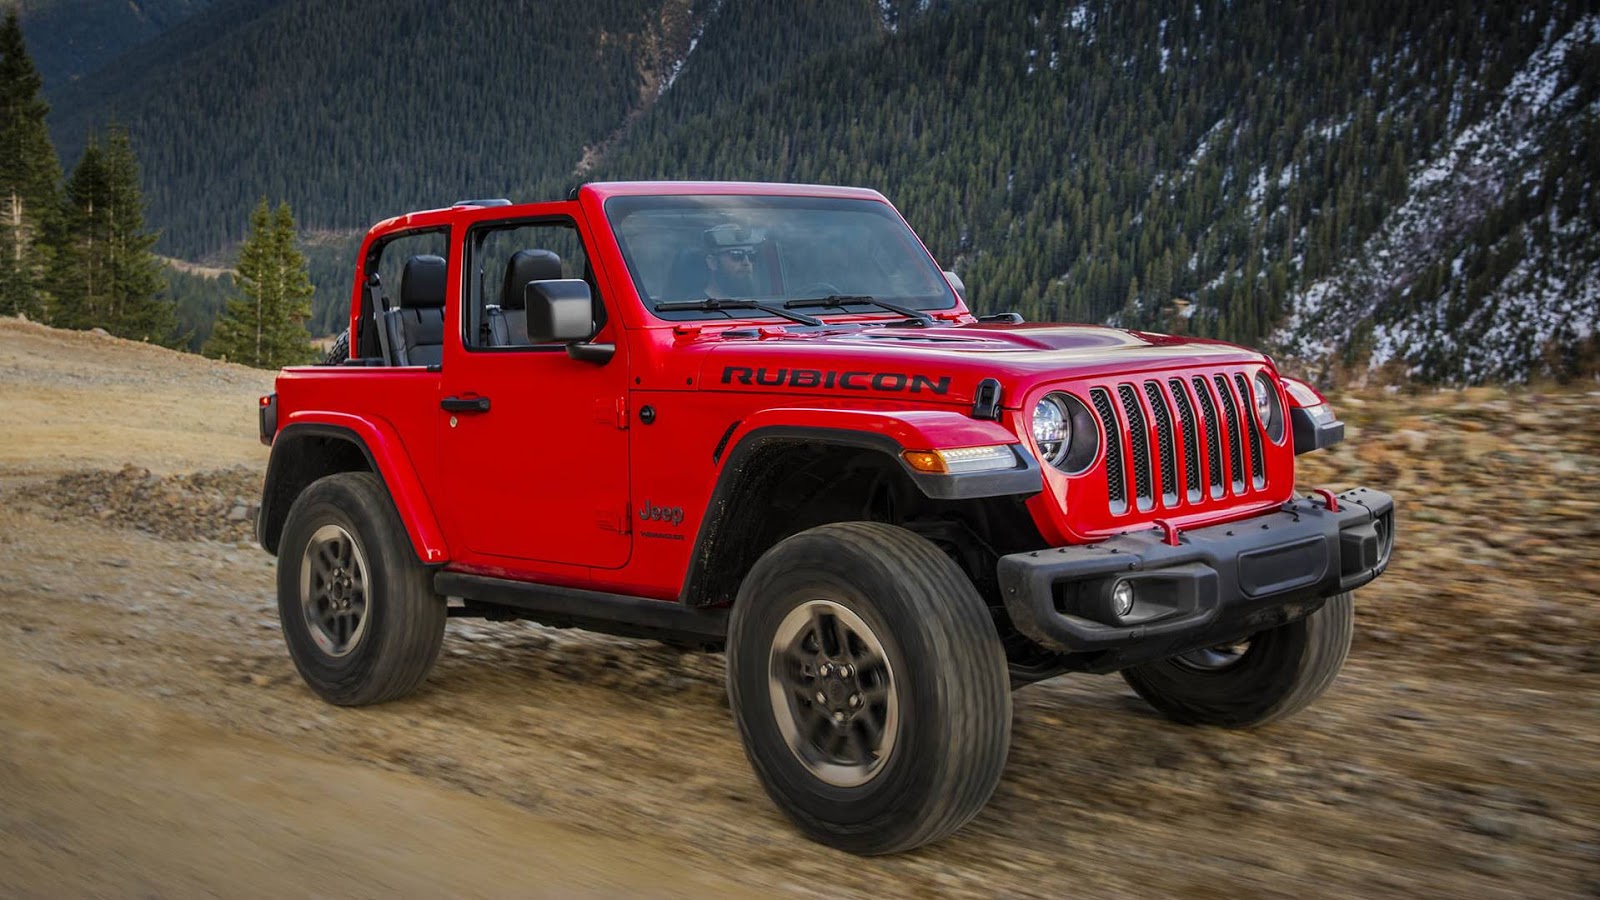 2018 Jeep Wrangler Sheds Weight, Adds Tech And 2.0L Turbo | Carscoops